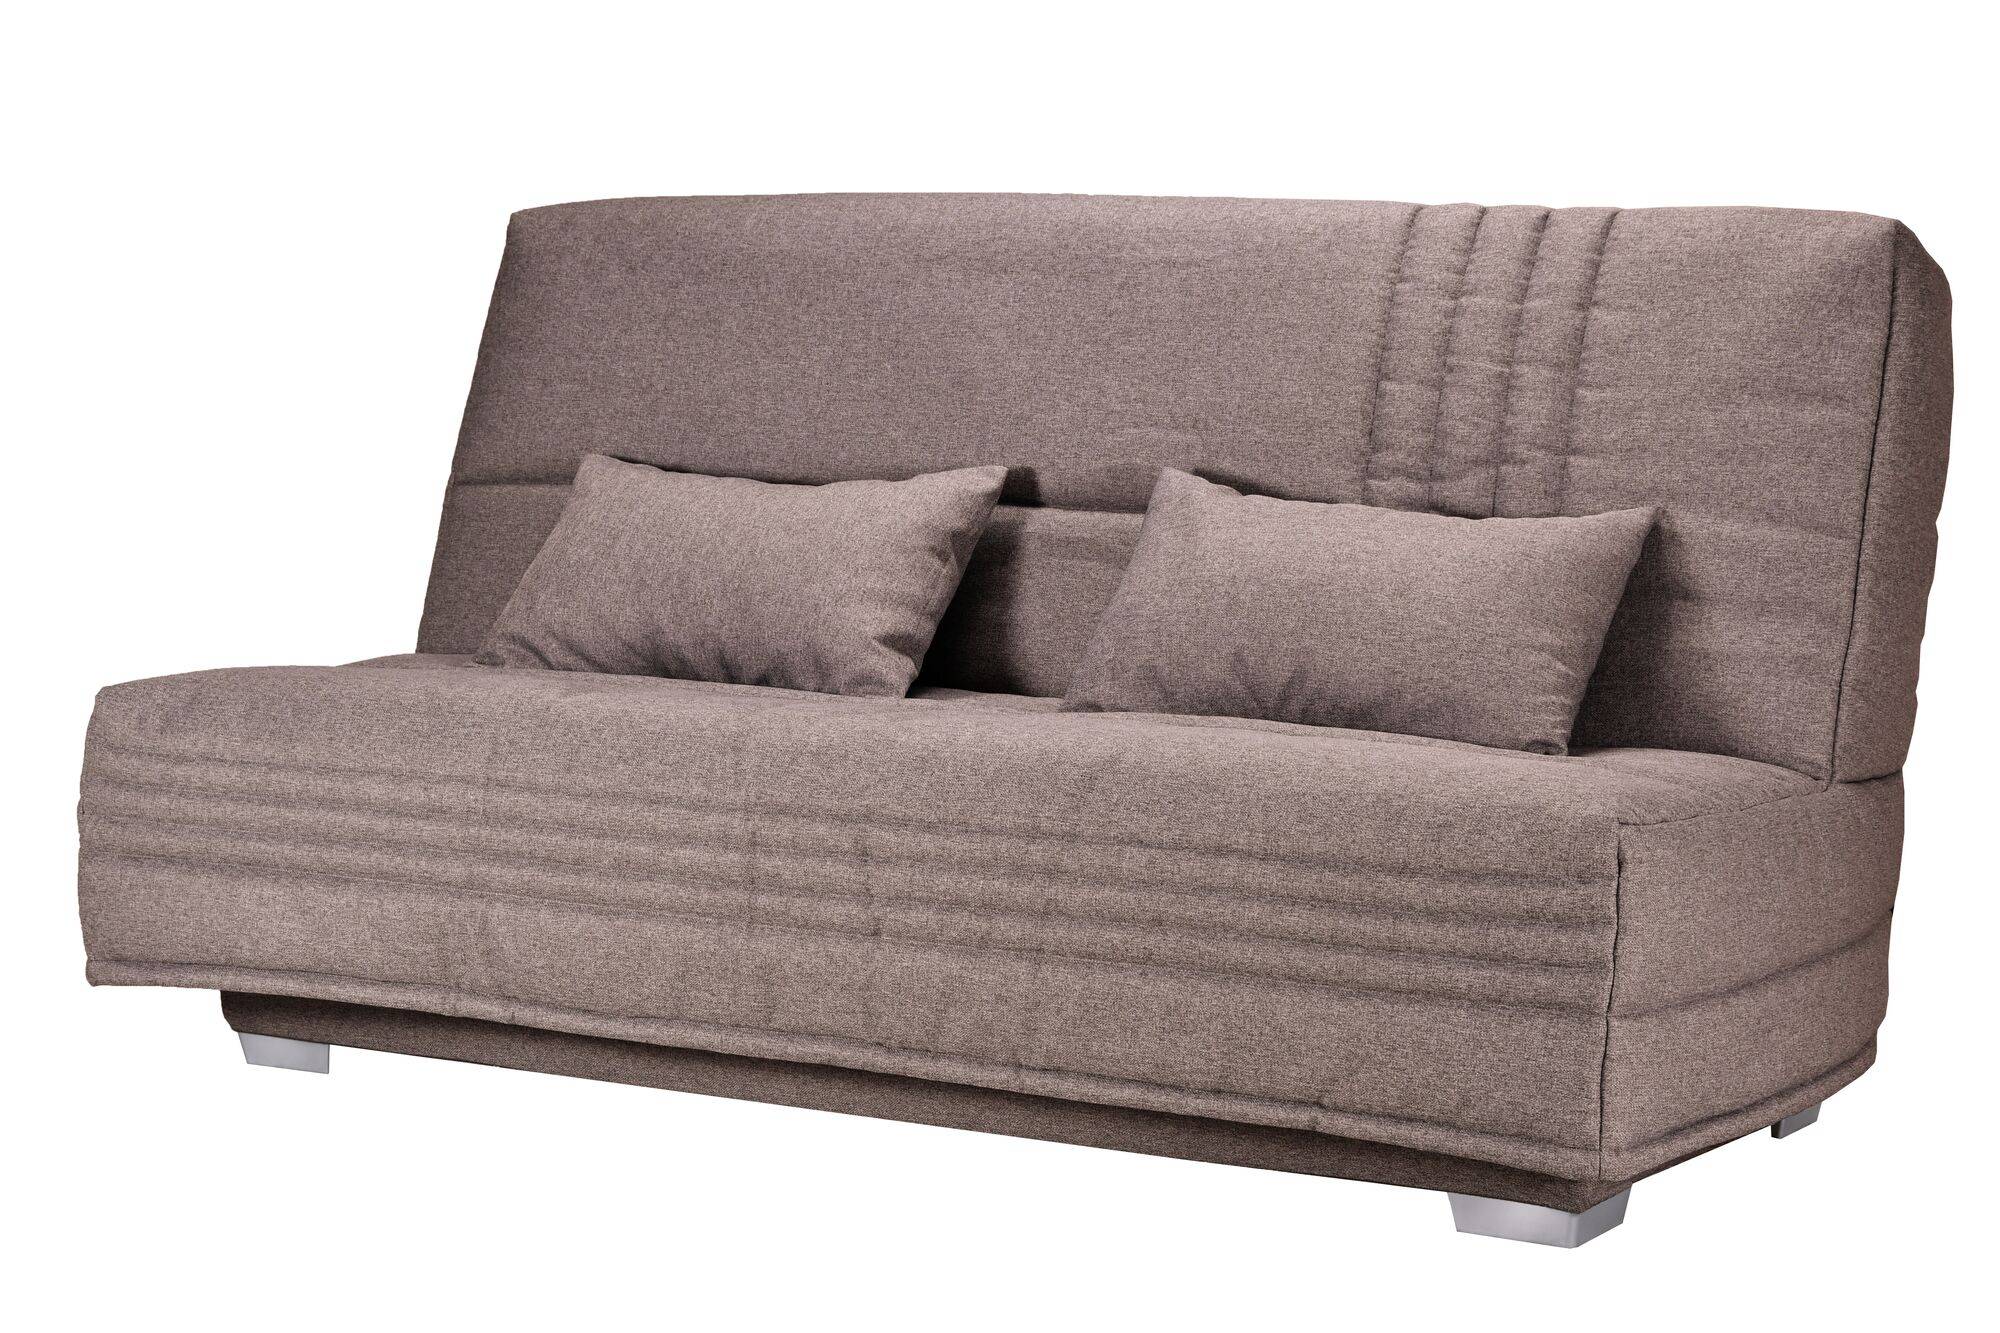 Banquette clic-clac genay taupe